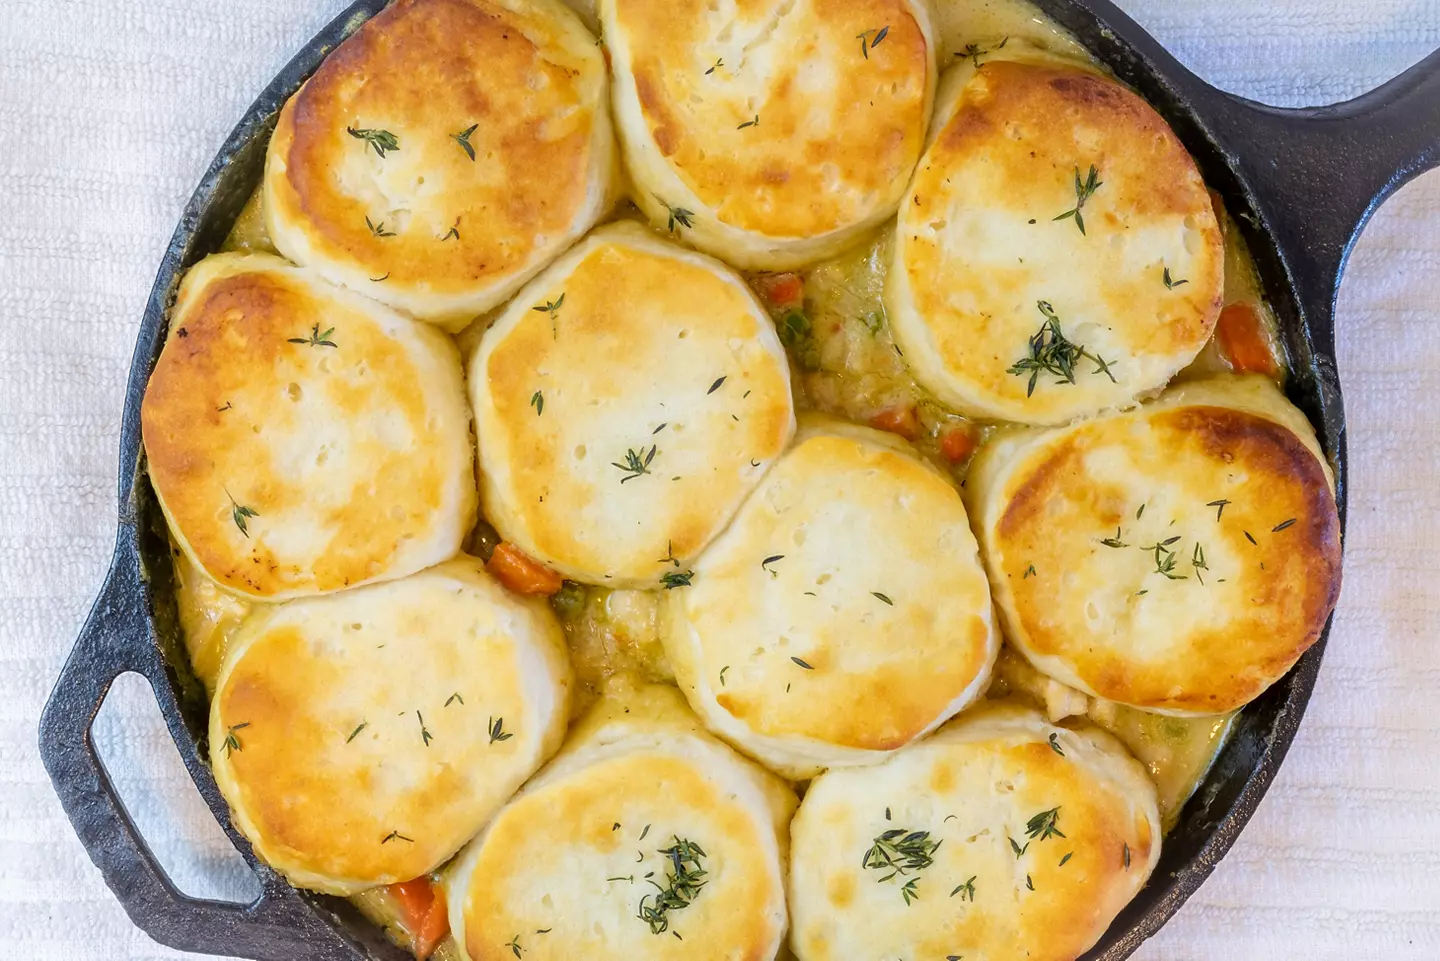 Chicken pot pie covered in biscuits cooked in a cast iron skillet.